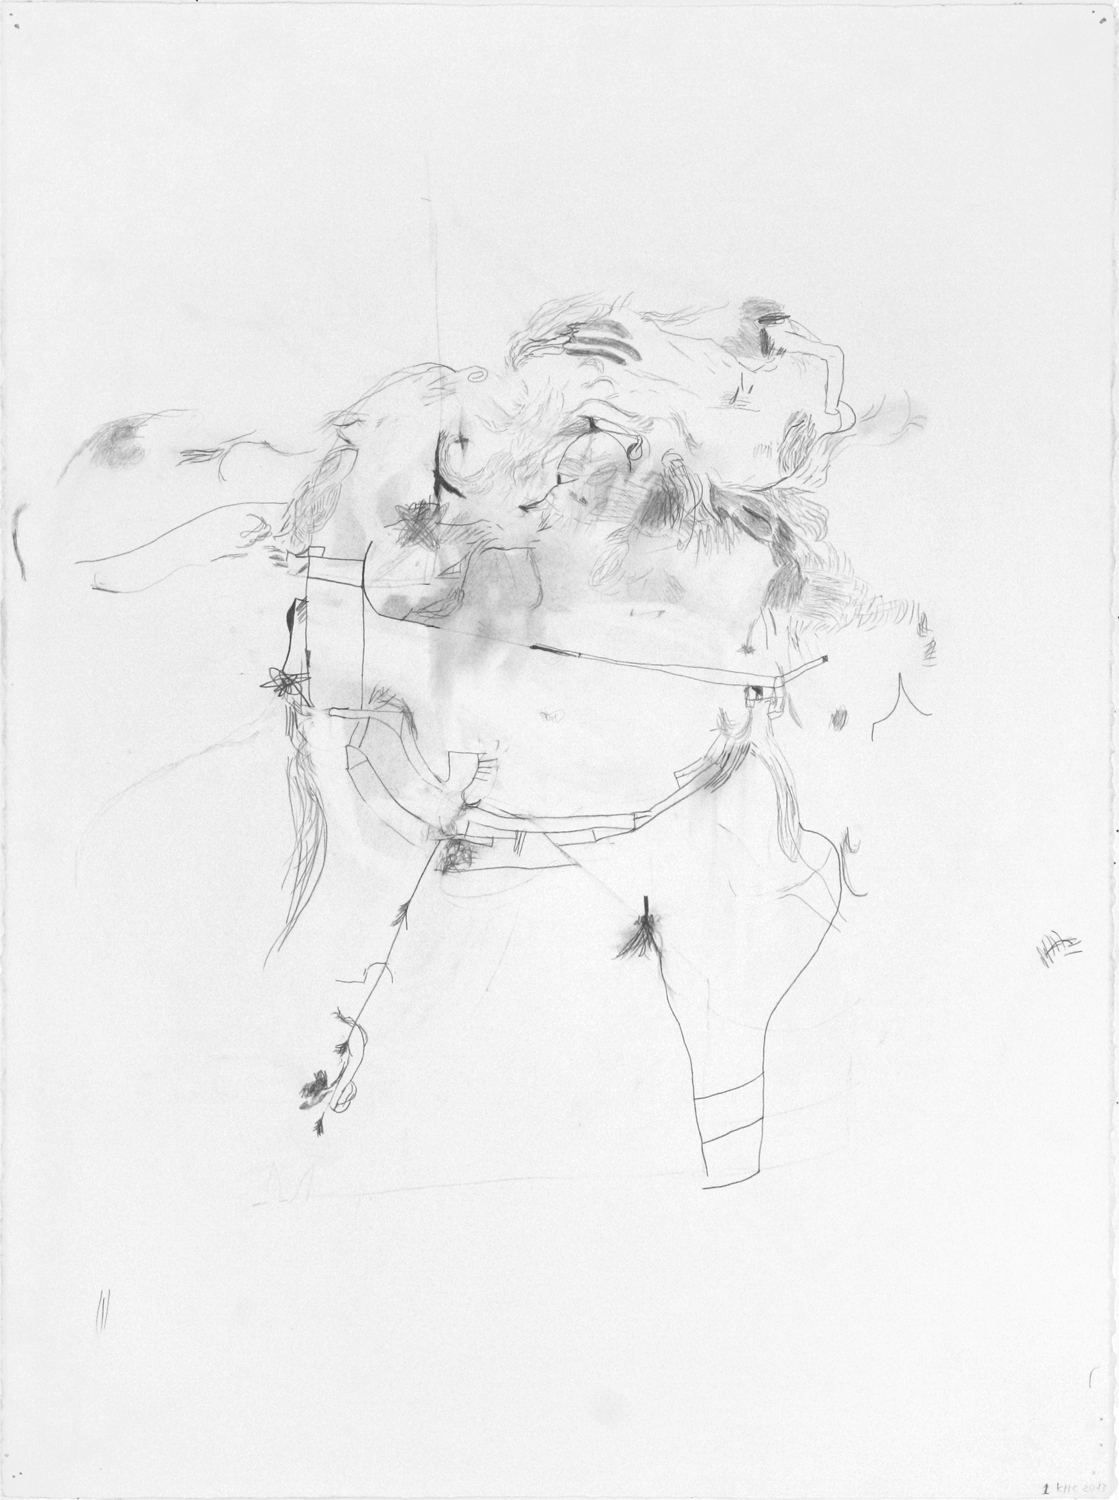  Untitled, 2013. 30" x 22", pencil on paper. 